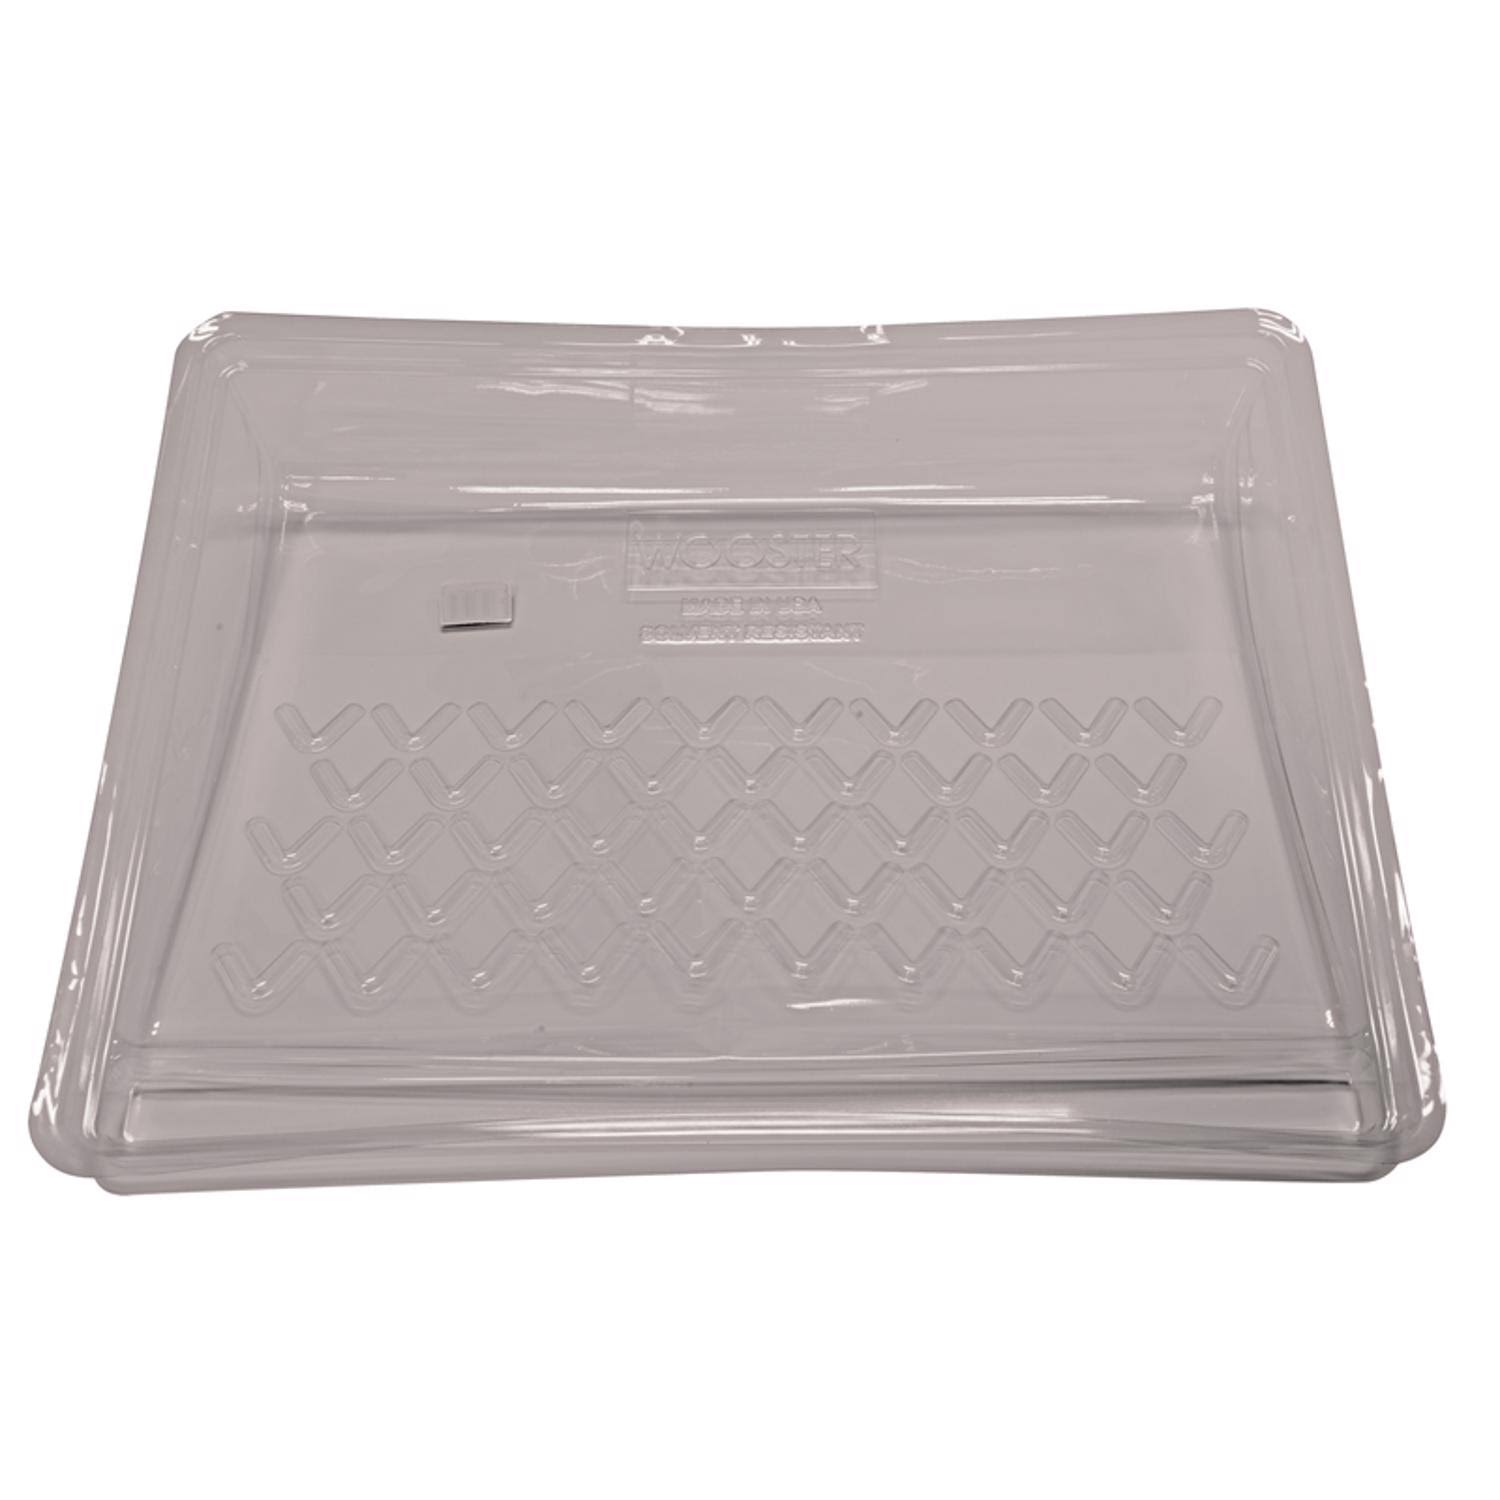 Wooster Brush R478 Big Ben Paint Tray Liner - 21"